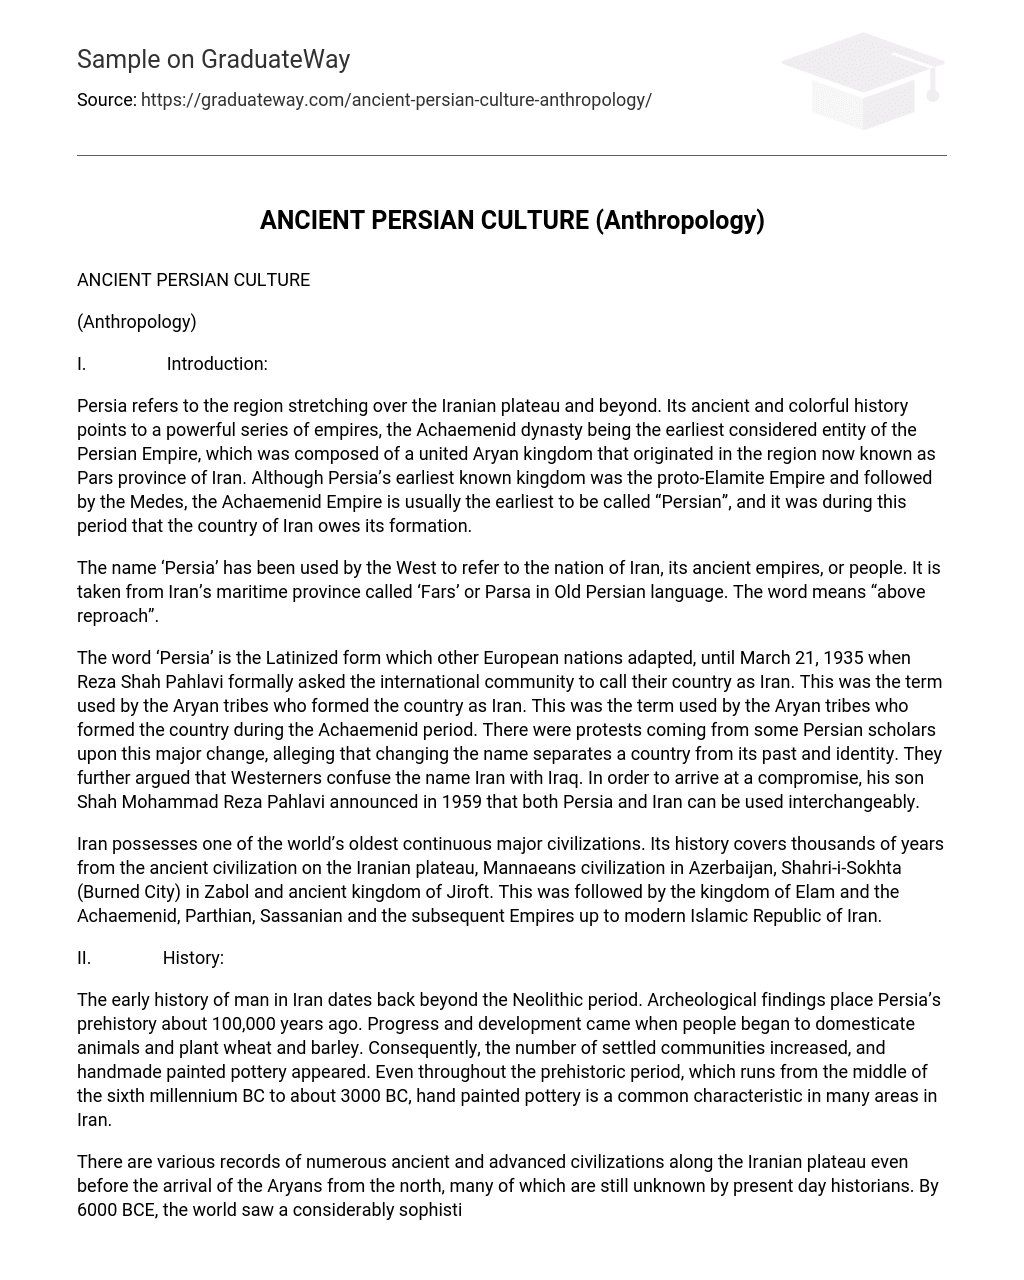 ANCIENT PERSIAN CULTURE (Anthropology)